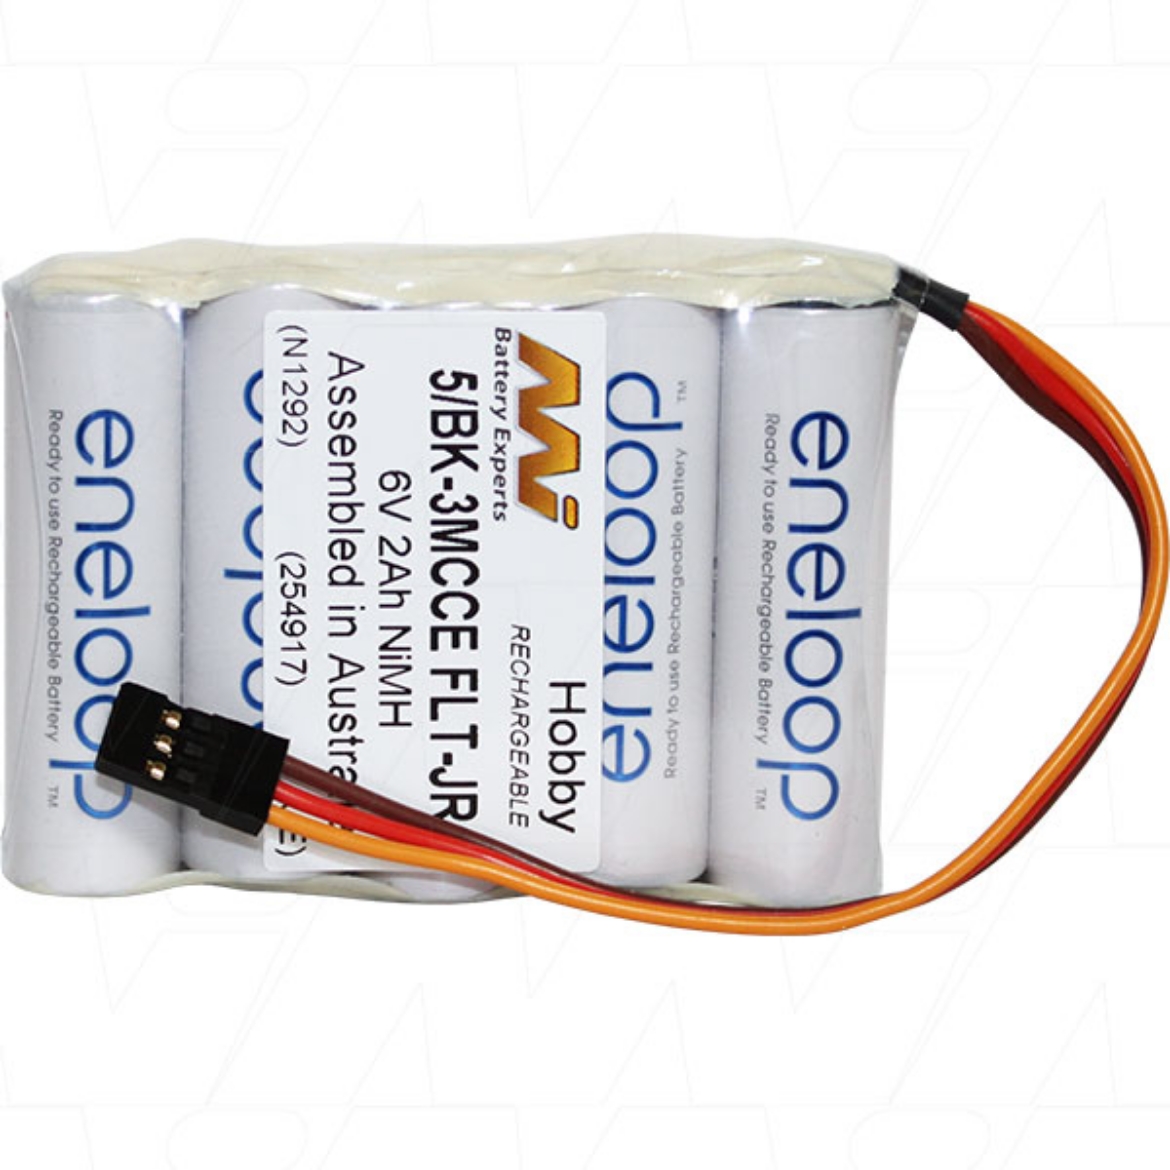 Picture of 5/BK-3MCCE FLT-JR ENELOOP 6V 2000mAh NiMh R/C HOBBY BATTERY PACK - 5 X AA BATTERIES WITH JR TYPE CONNECTOR -- (READY TO USE)